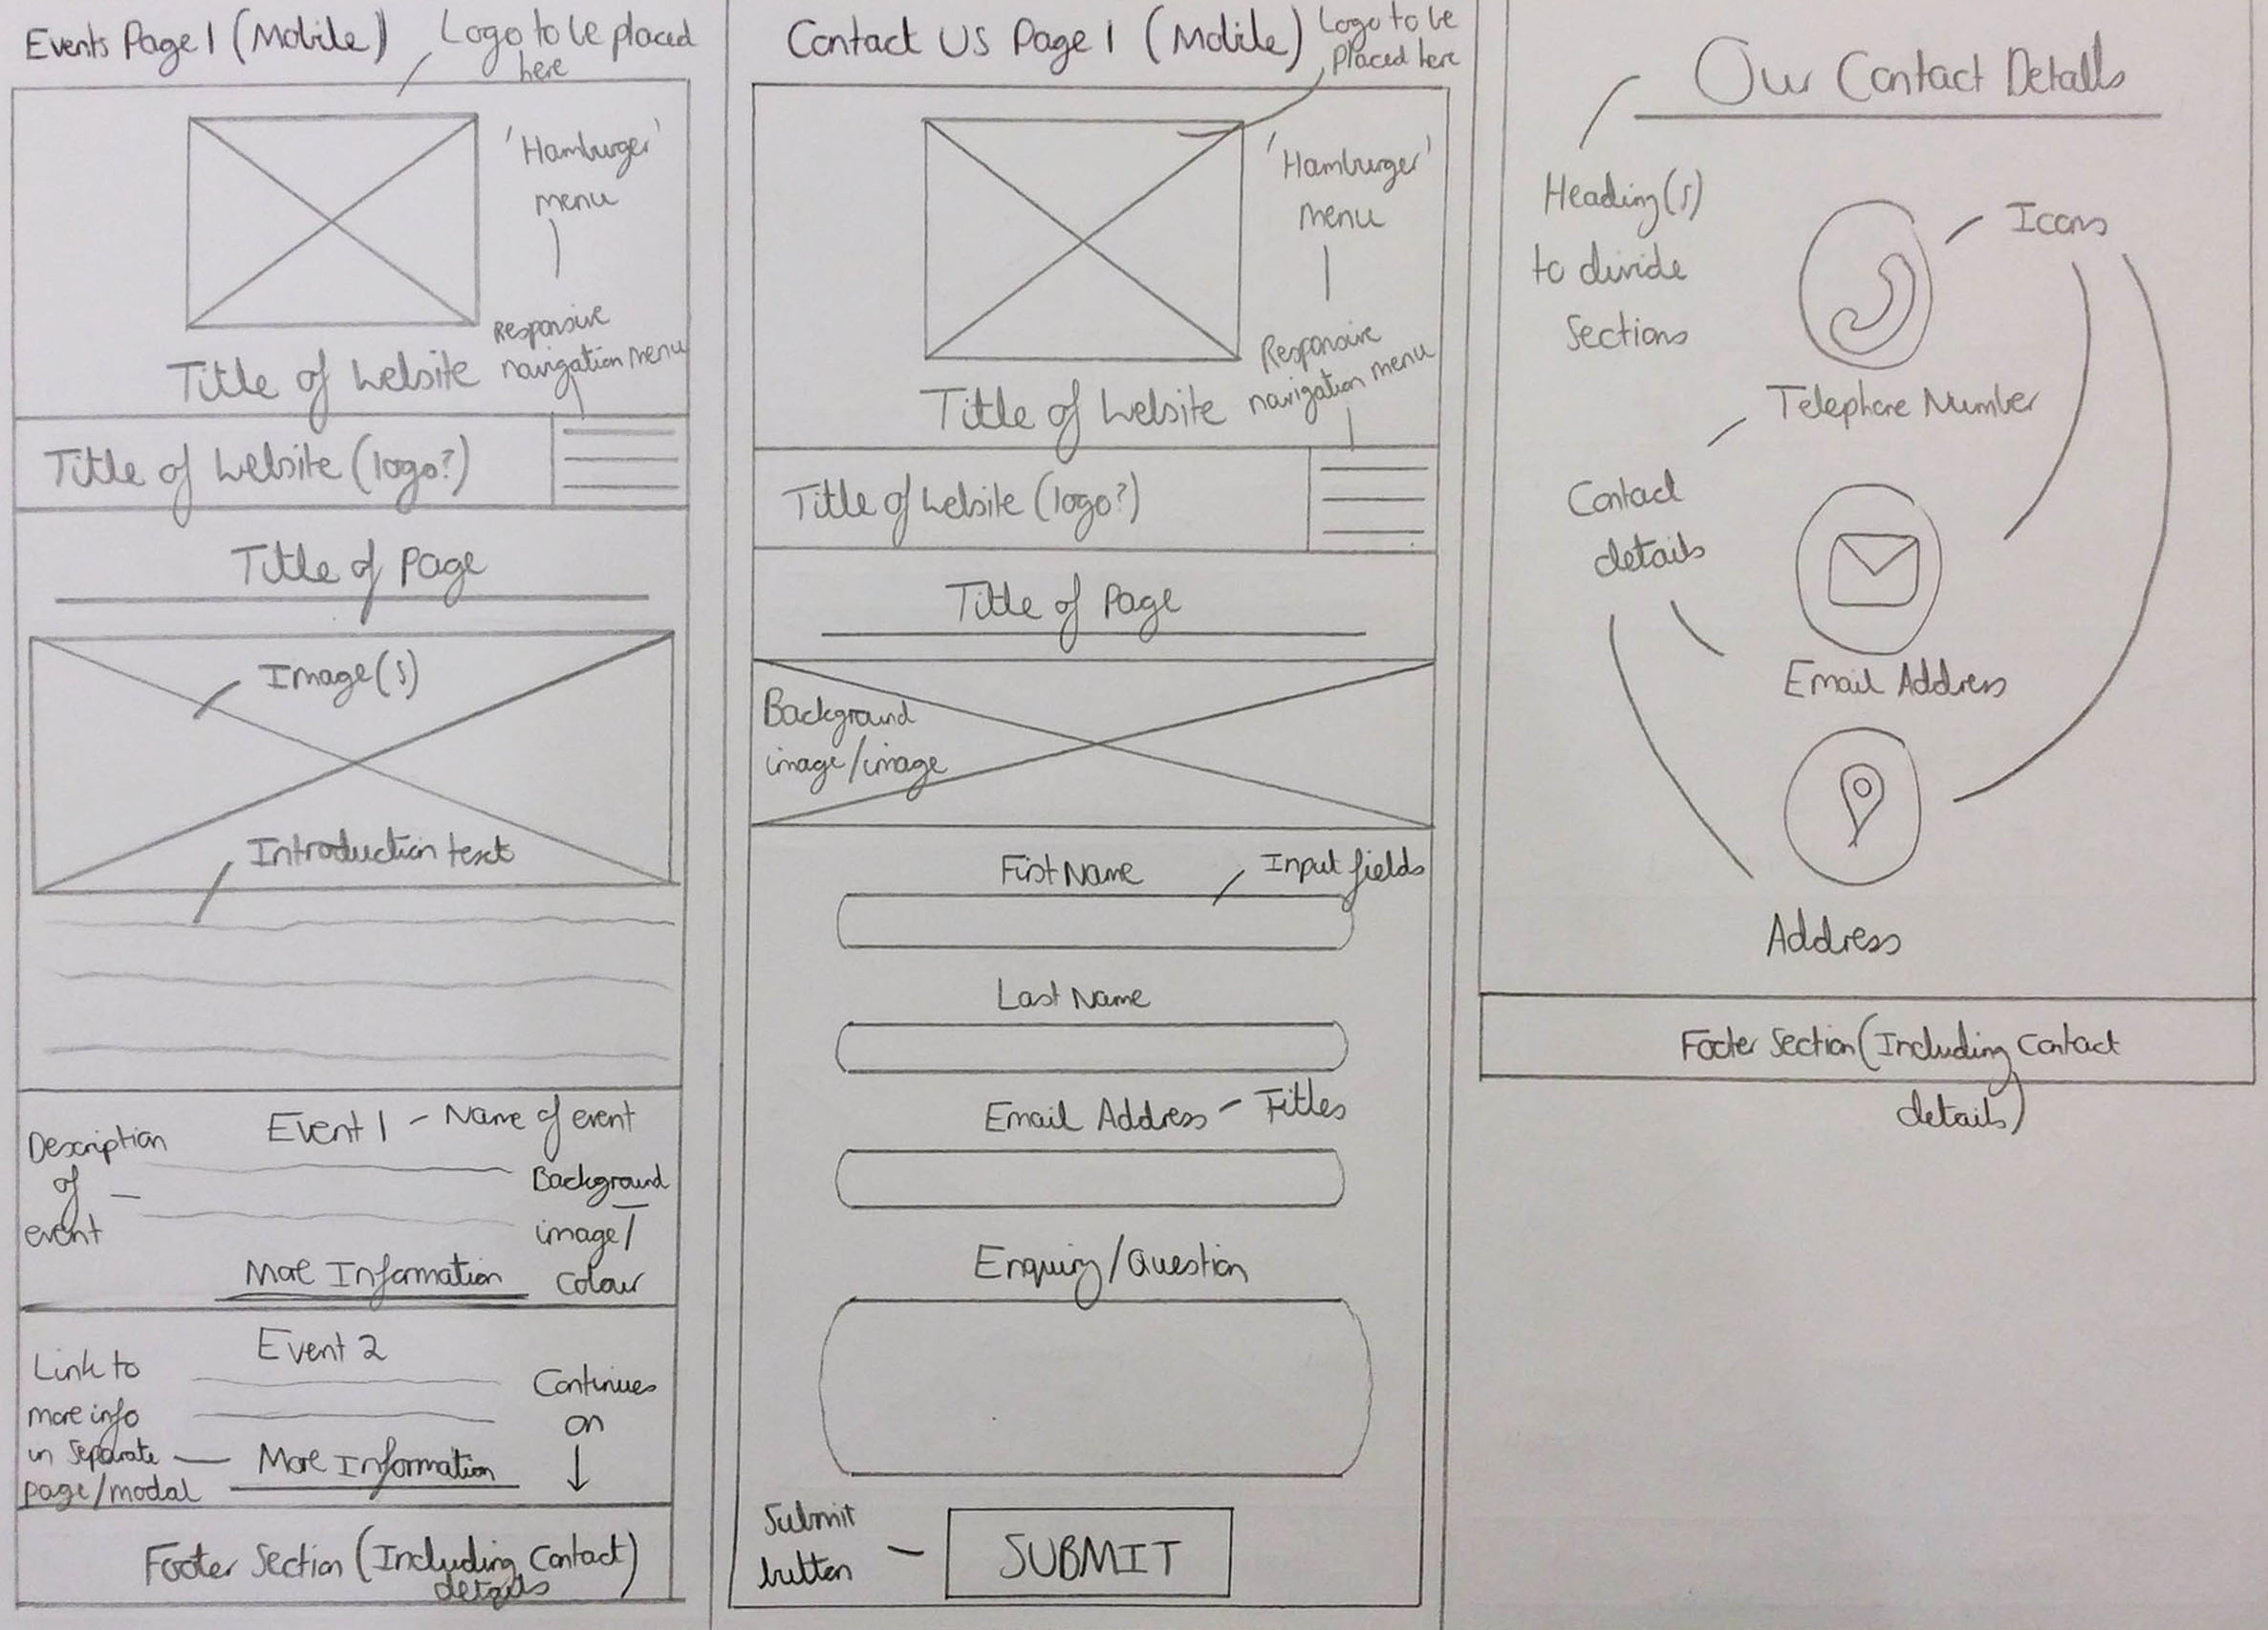 The Sketched Events and Contact Us (Parts 1 and 2) Pages Wireframes